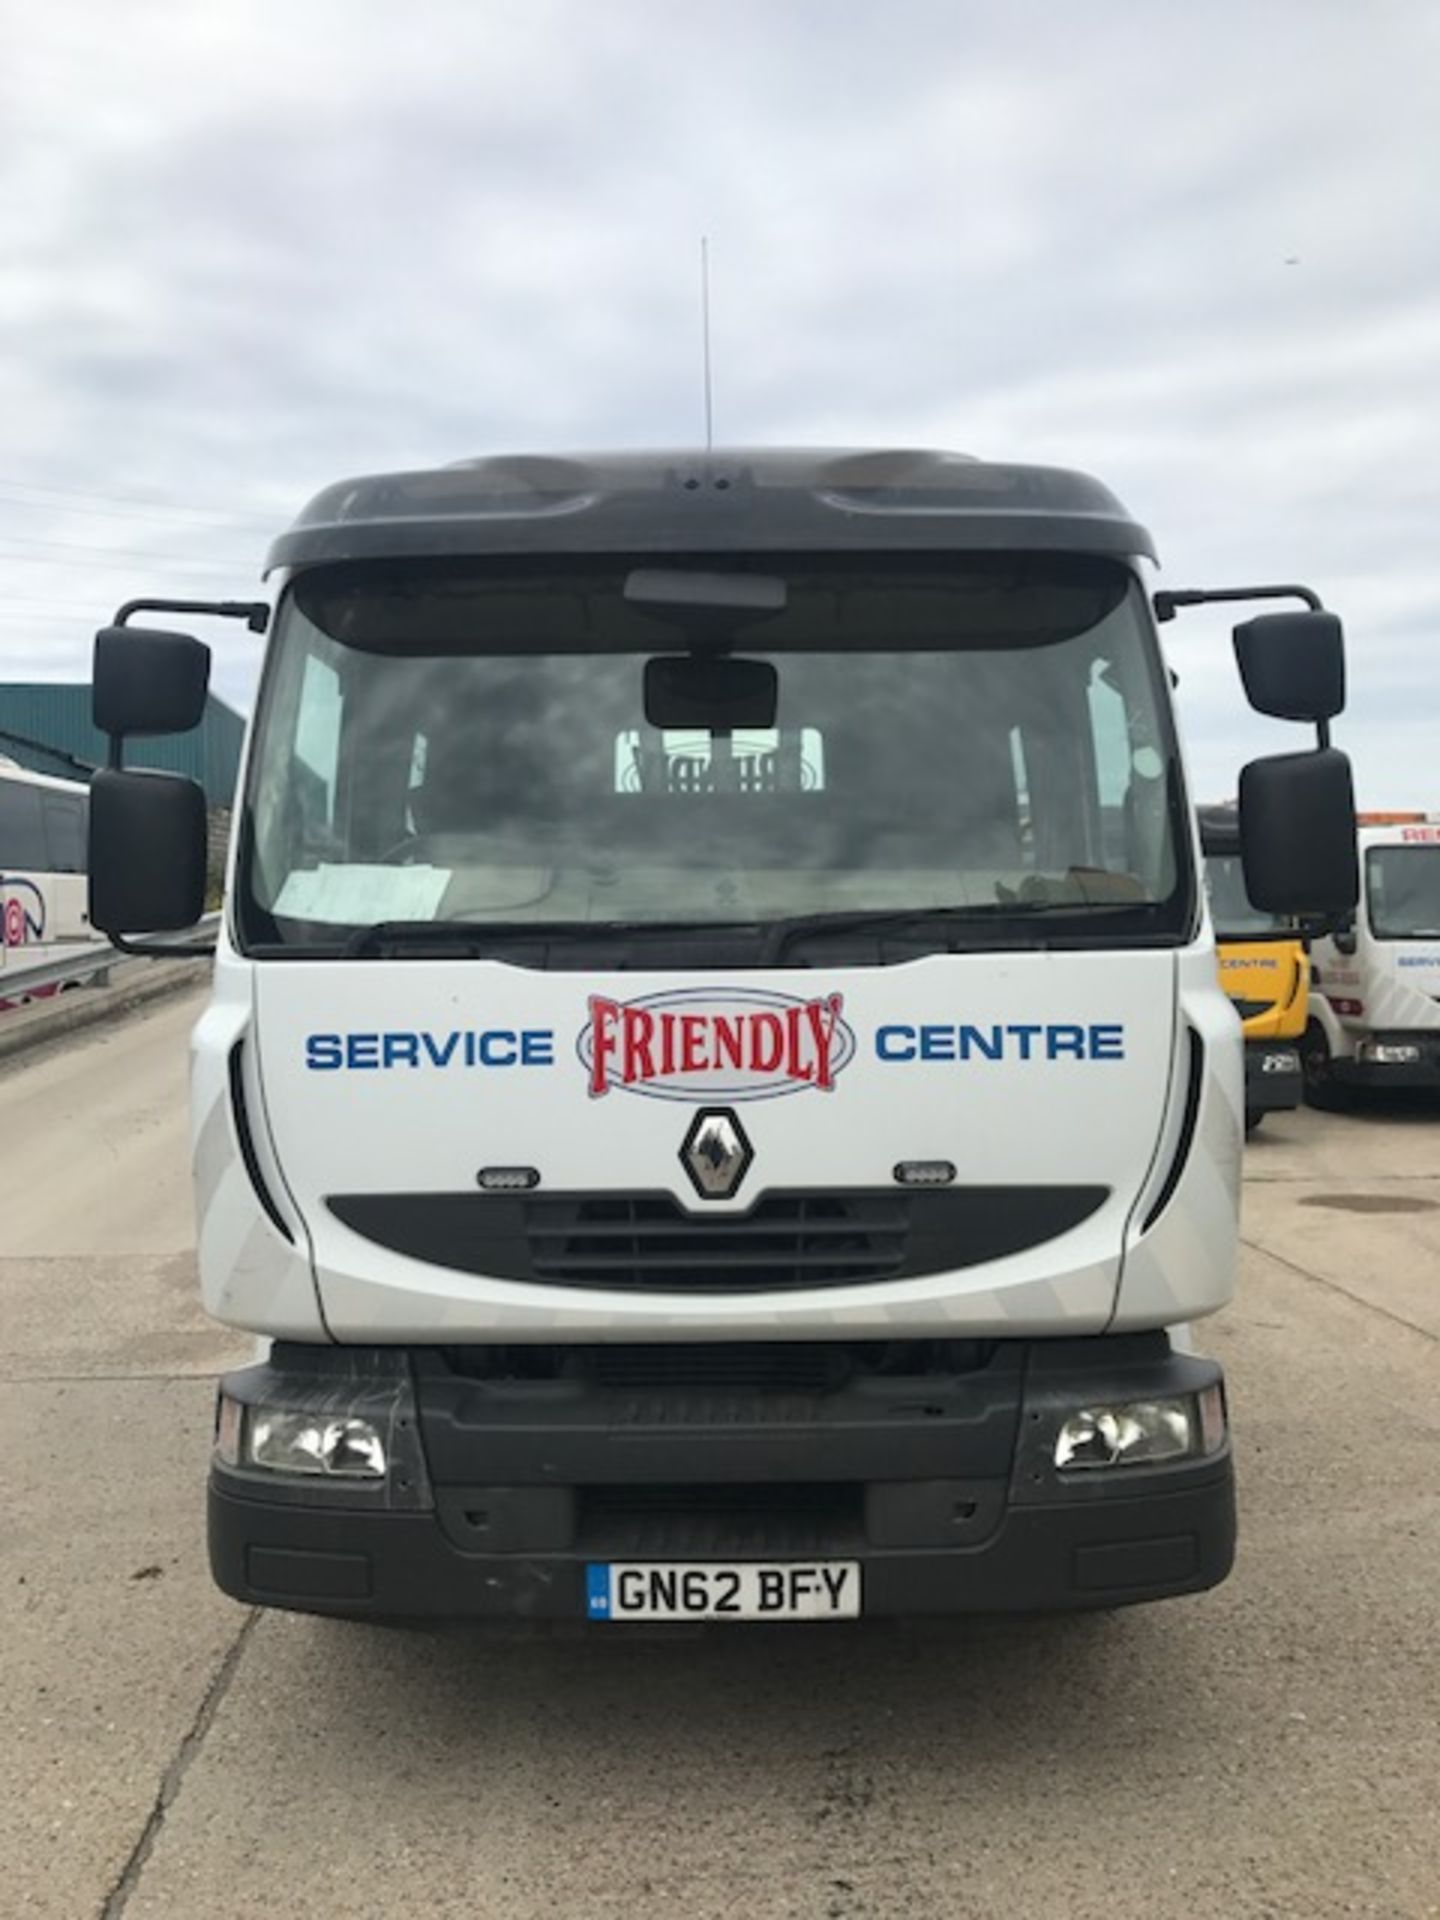 2013 Renault Midlum 270 DXI 16T crew cab tilt and slide breakdown recovery vehiclecomplete with - Image 2 of 18